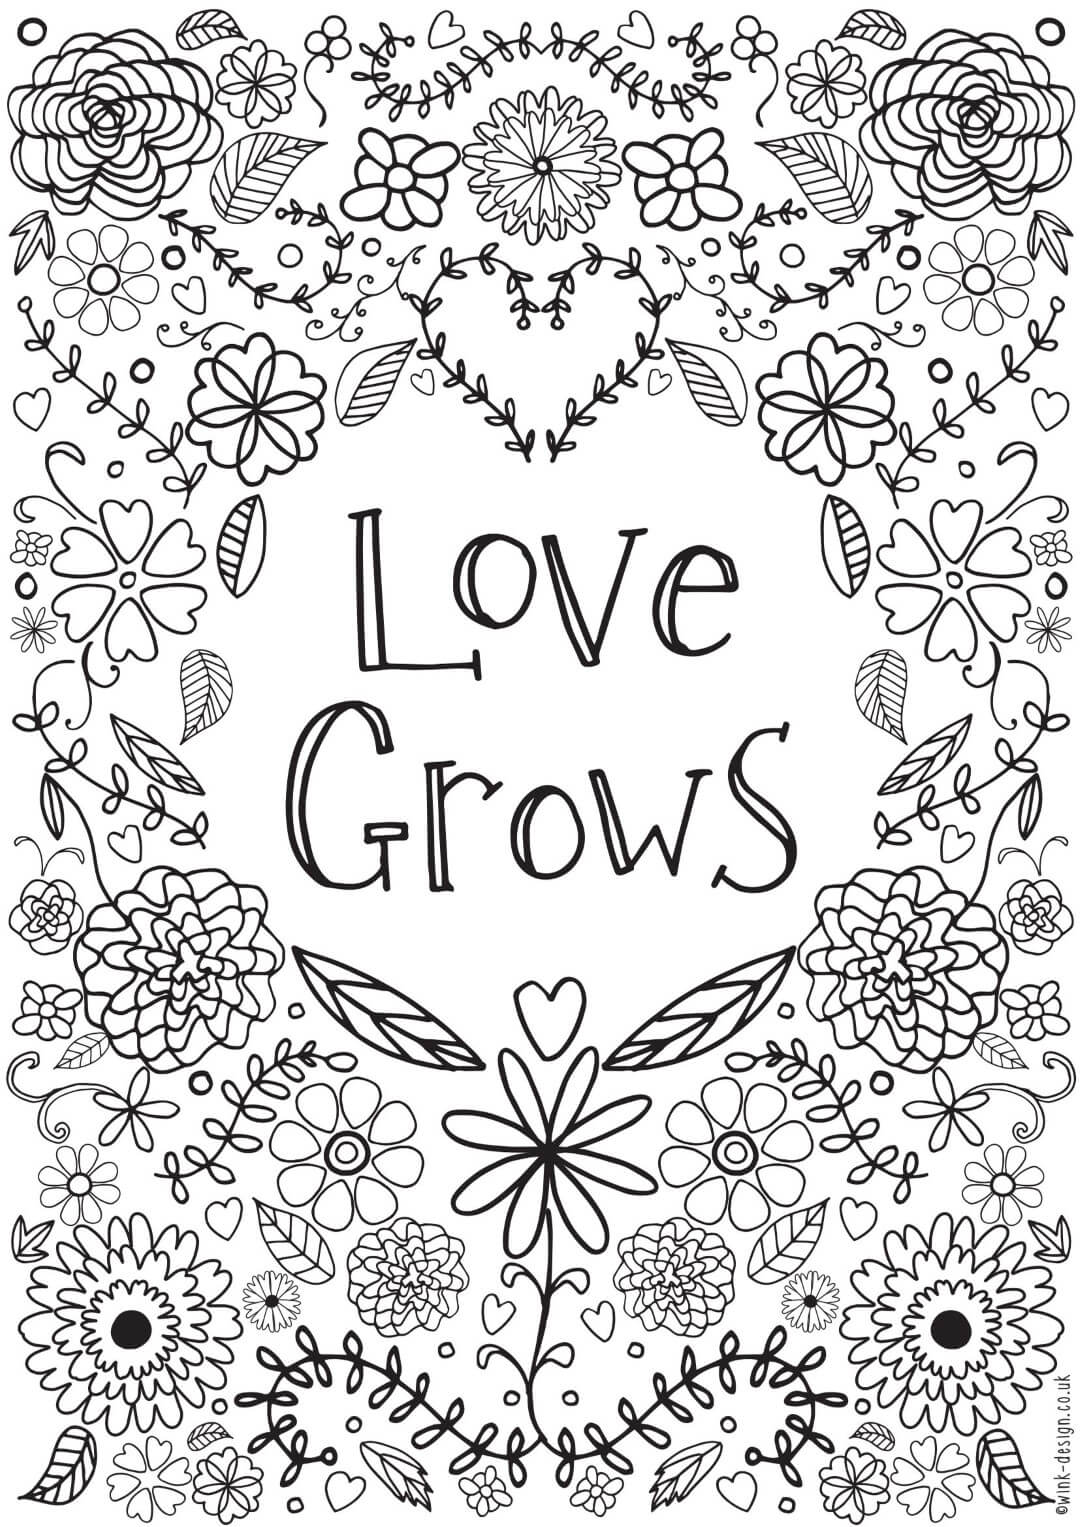 Love Grows Saying Coloring Page